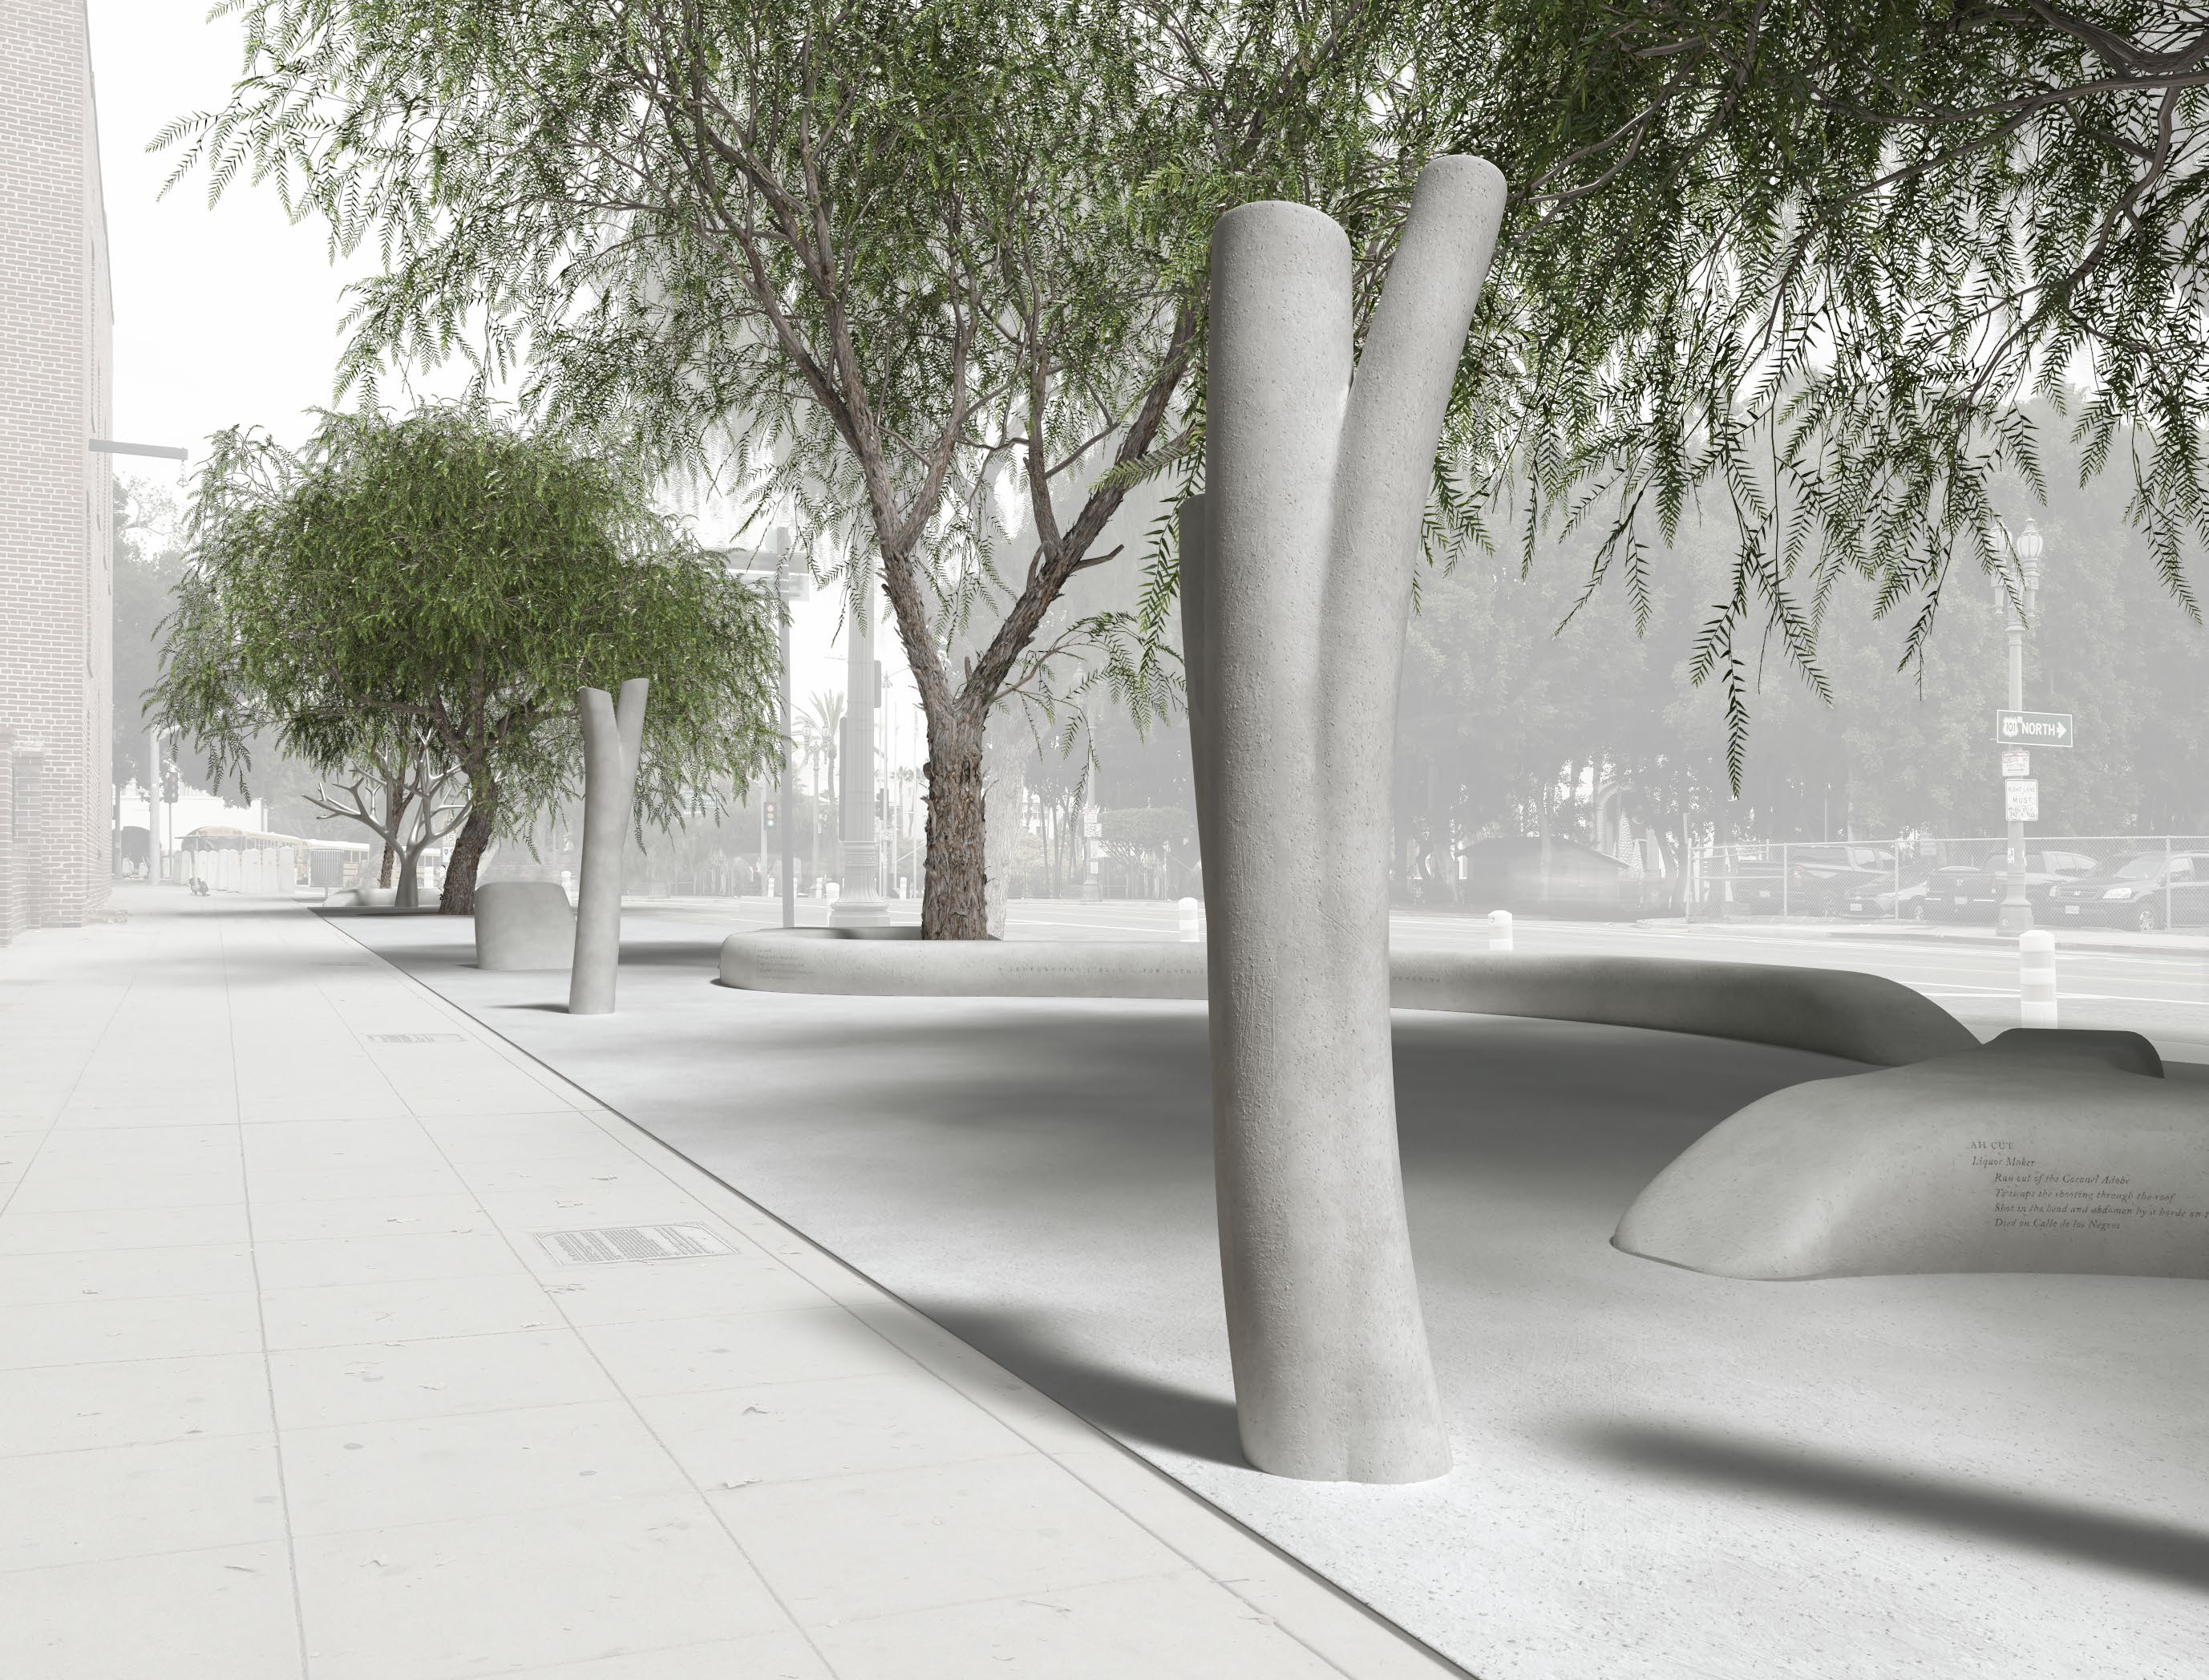 Memorial to the Victims of the 1871 Chinese Massacre. Design proposal image by Sze Tsung Nicolás Leong and Judy Chui-Hua Chung